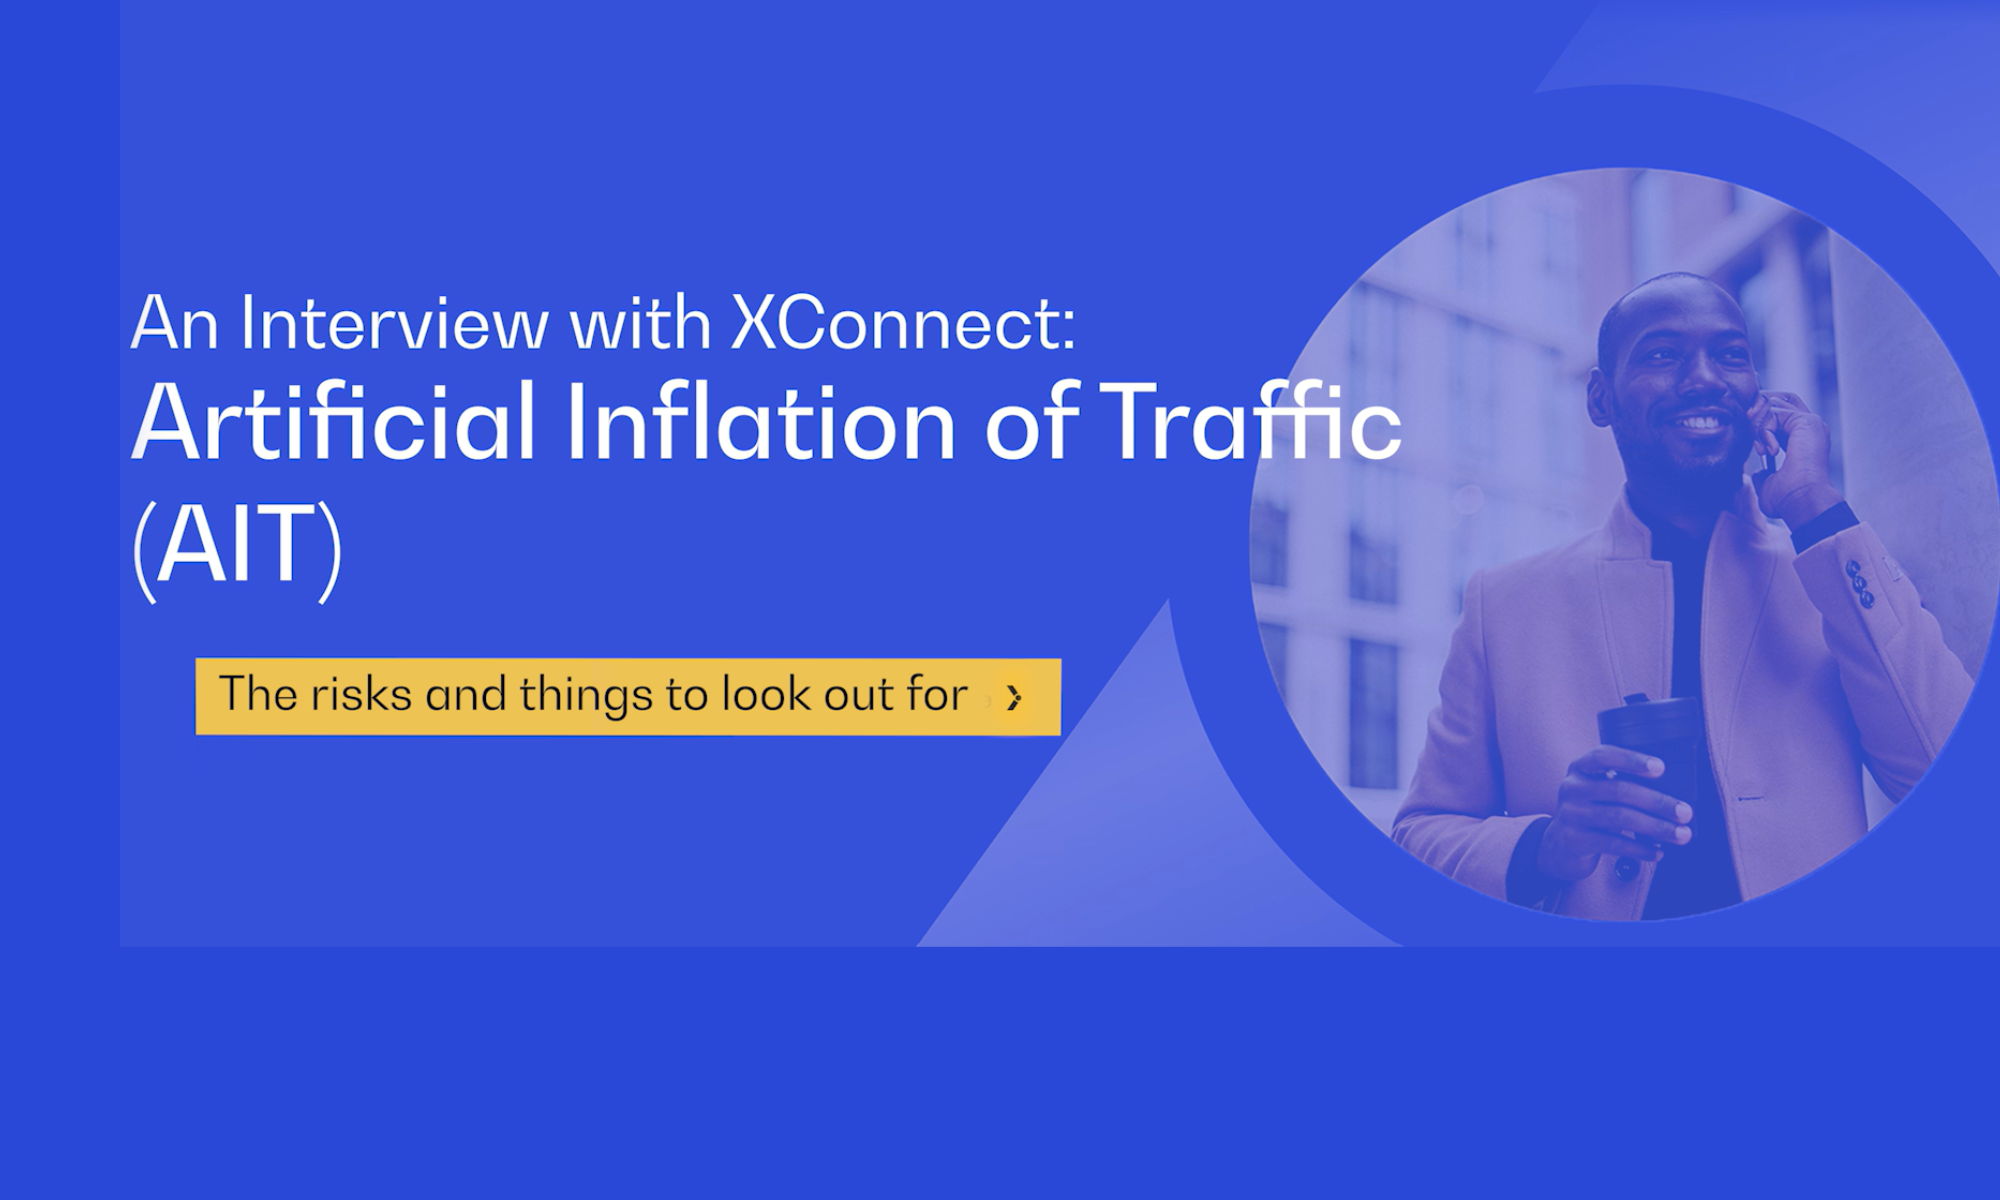 Artificial Inflation of Traffic (AIT)